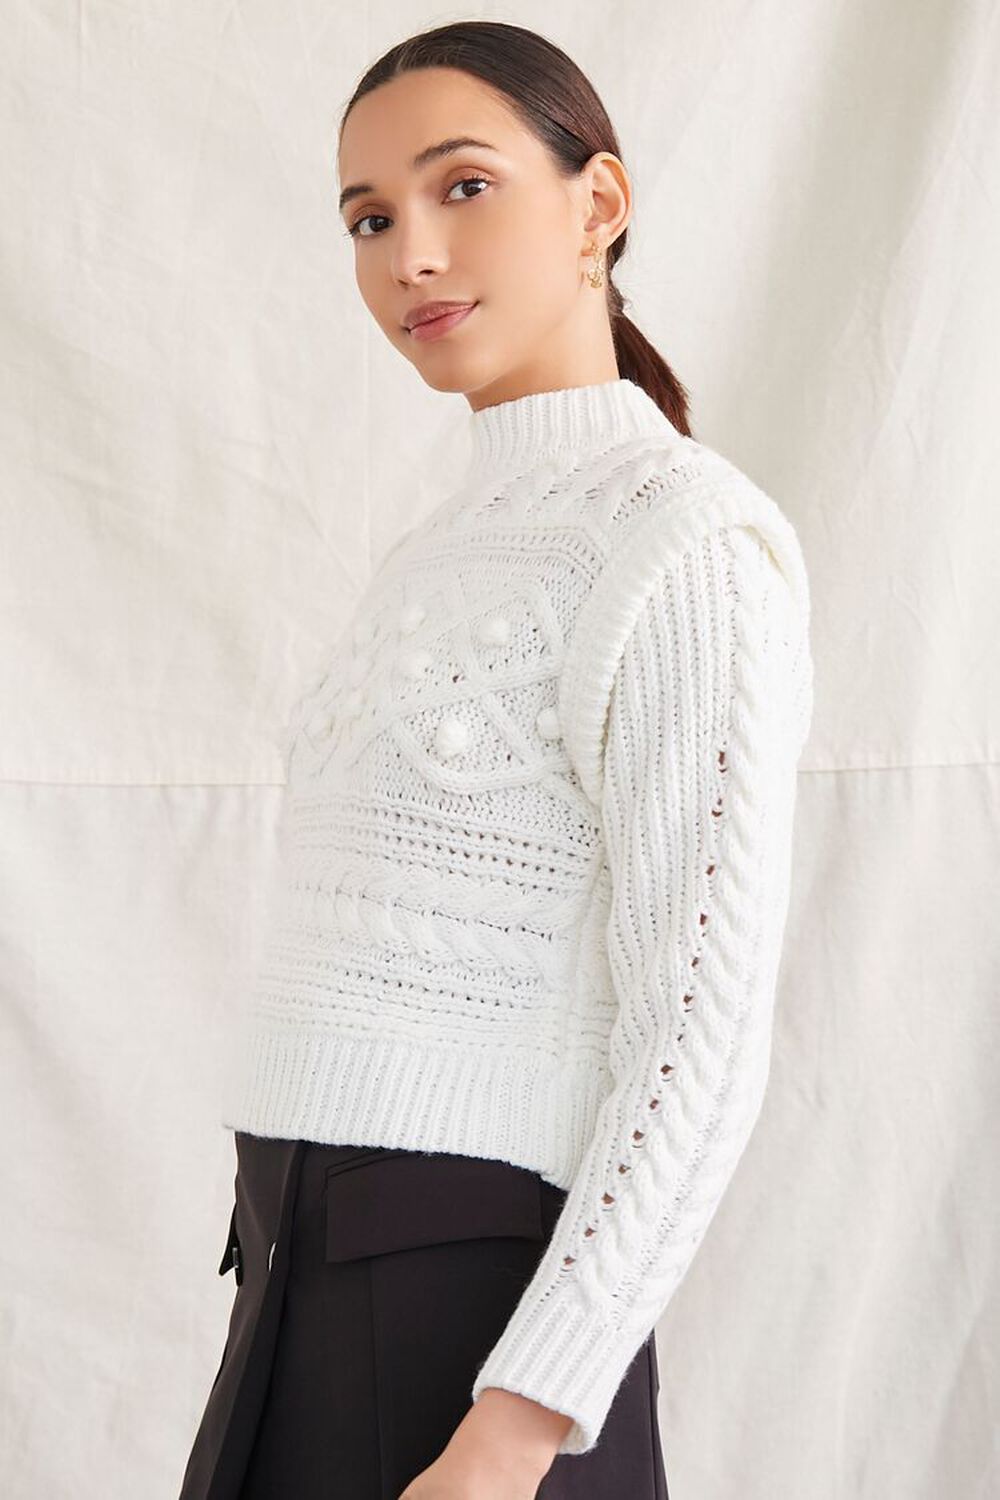 WHITE Pom Pom Cable Knit Sweater, image 2